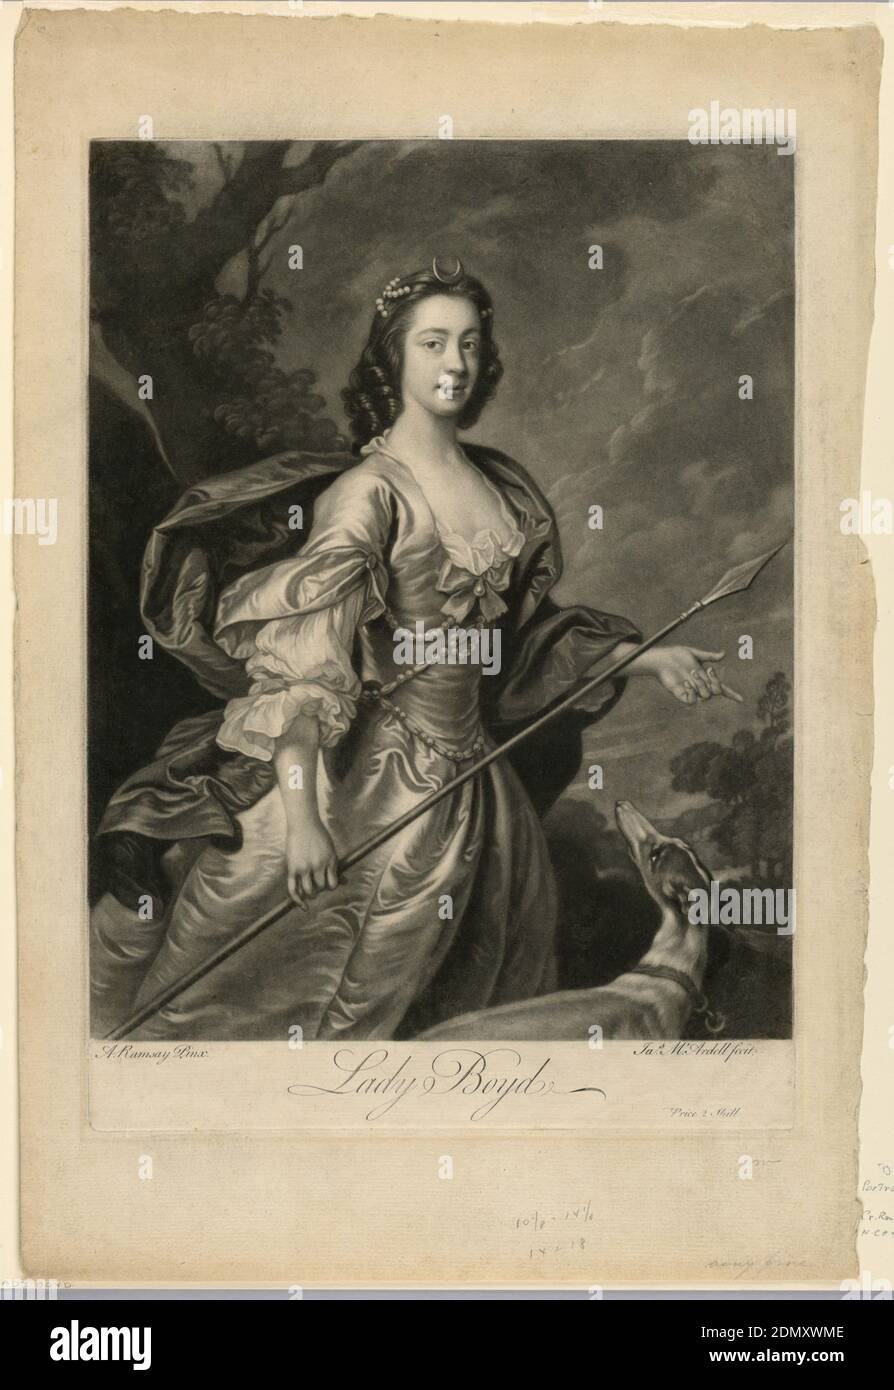 Portrait of Lady Boyd, James MacArdell, Irish, 1729 - 1765, Allan Ramsay, Scottish, 1713 - 1784, Etching on paper in black ink, Lady Boyd is depicted as Diana. She is walking from left to right accompanied by her dog at right. The portrait is knee-length in three quarter view to right. She holds a spear in her right hand., England, 1749, Print Stock Photo